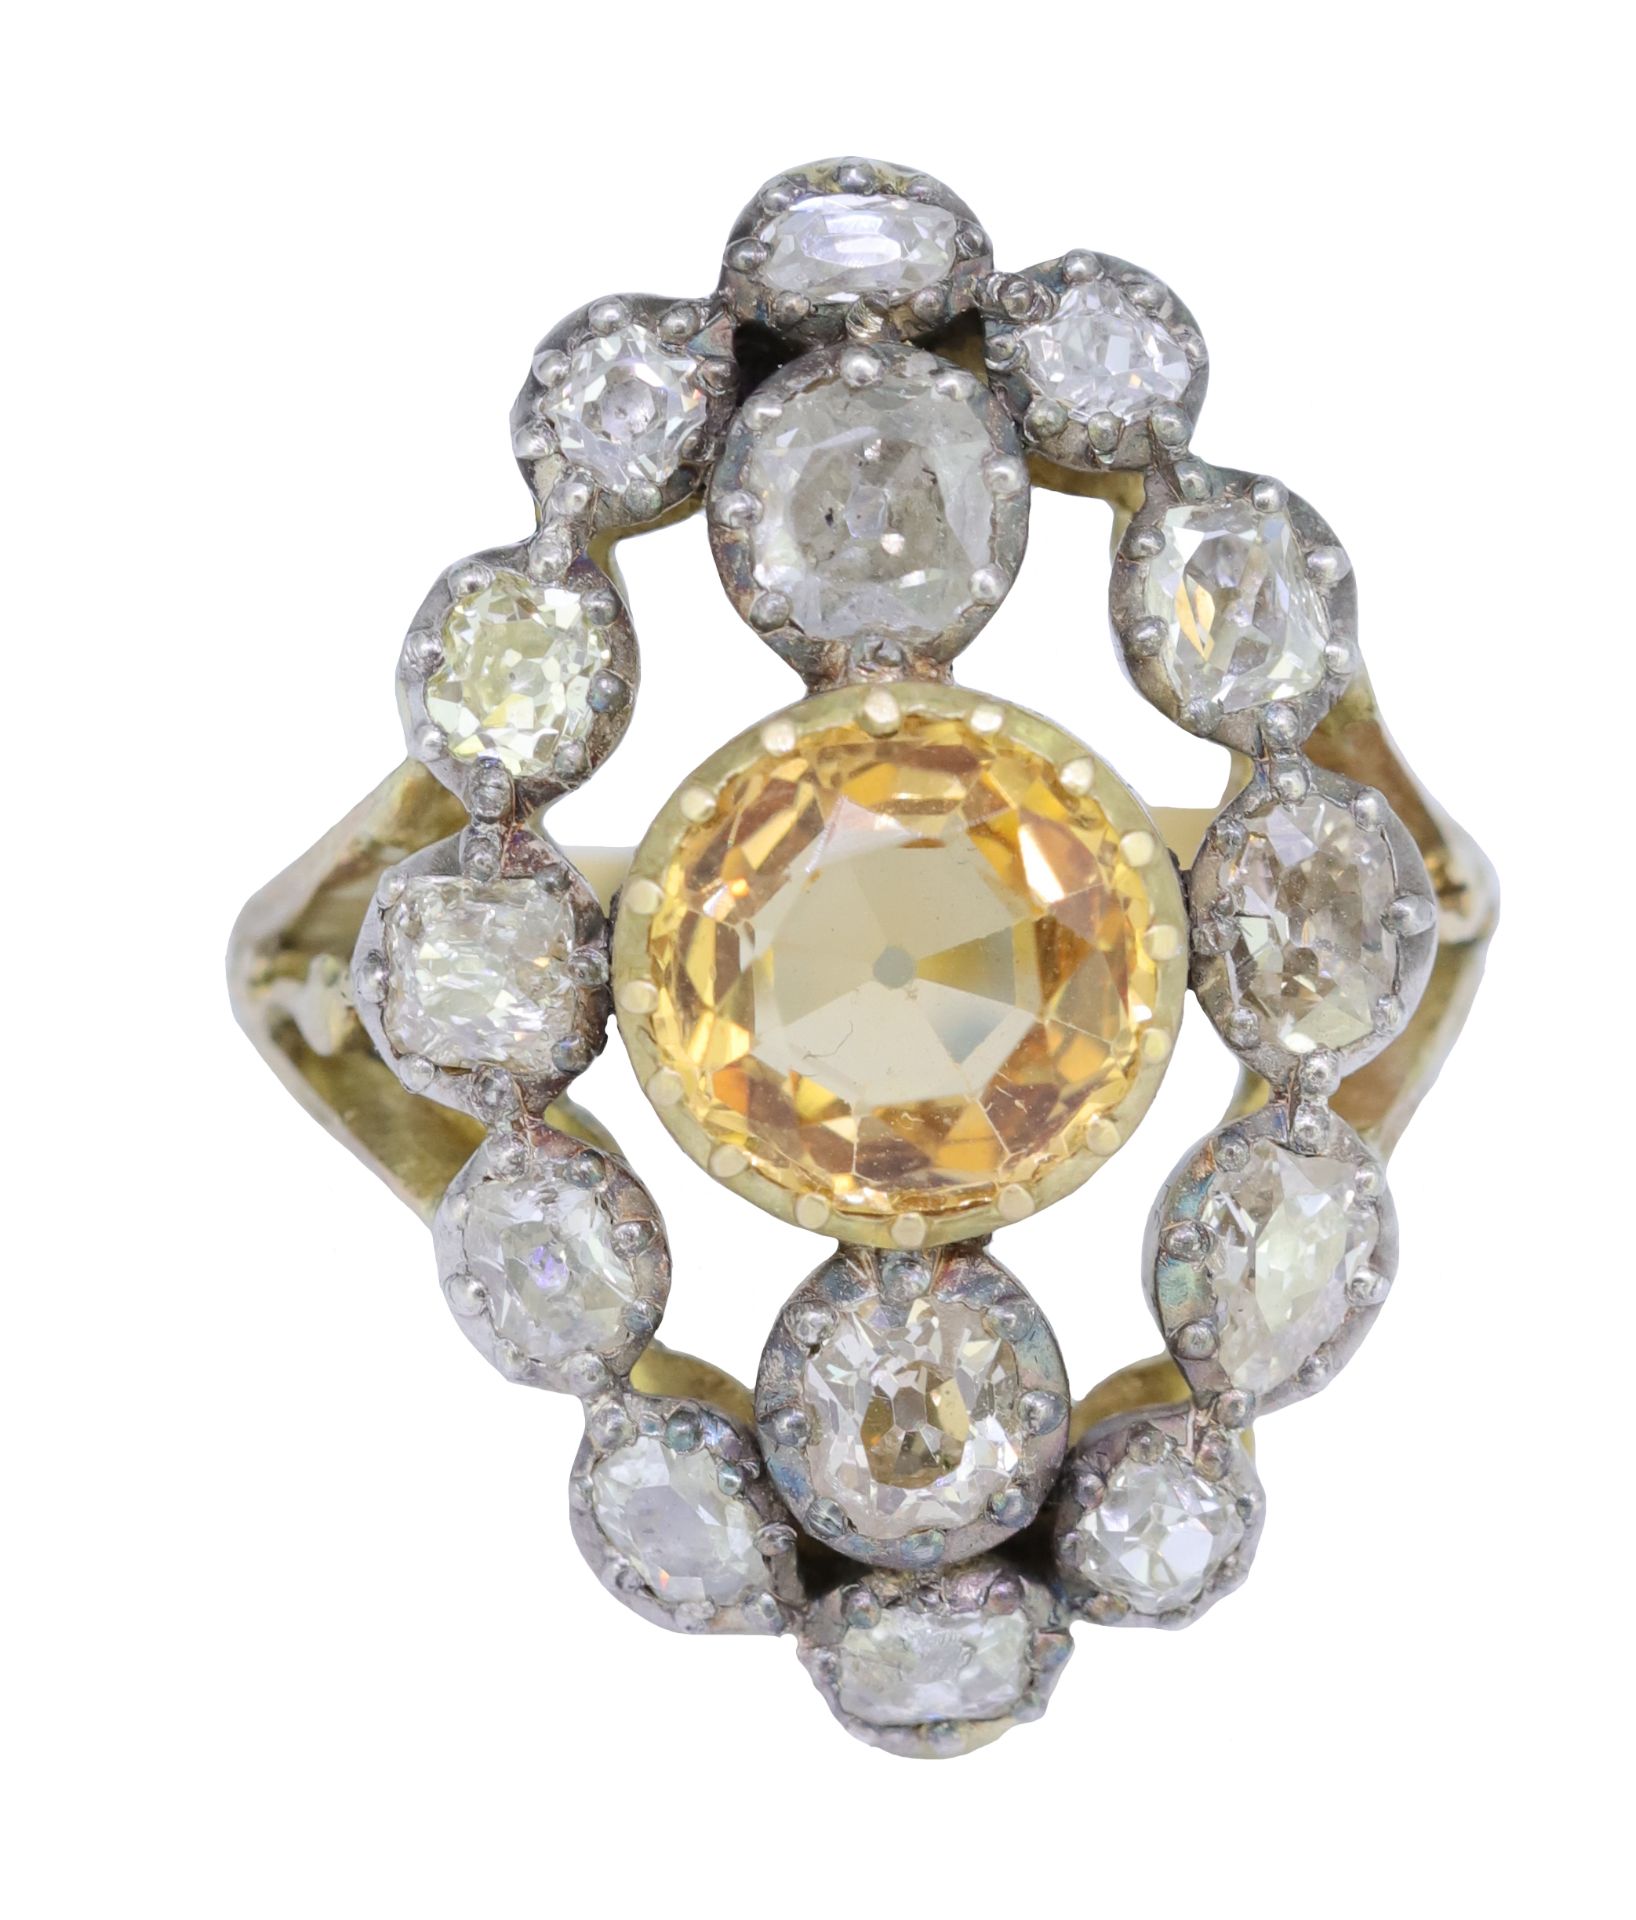 ANTIQUE TOPAZ AND DIAMOND CLUSTER RING